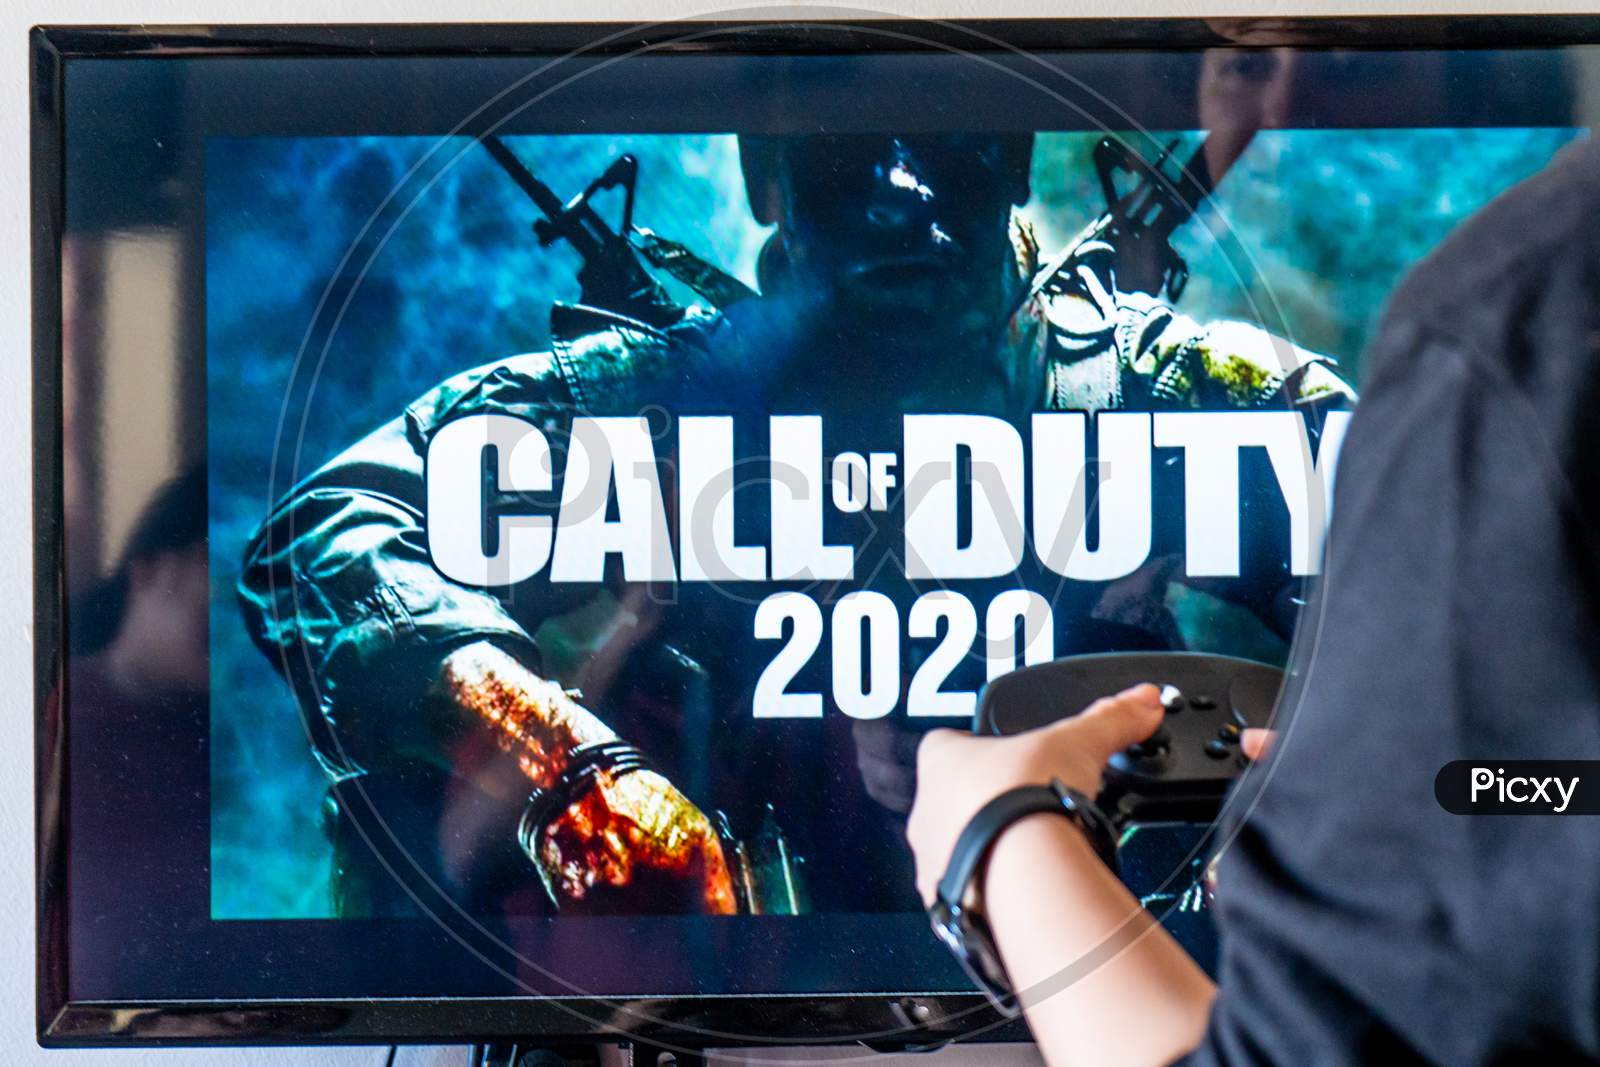 Woman Holding A Steam Controller And Playing Popular Video Game Call Of Duty On A Television And Pc